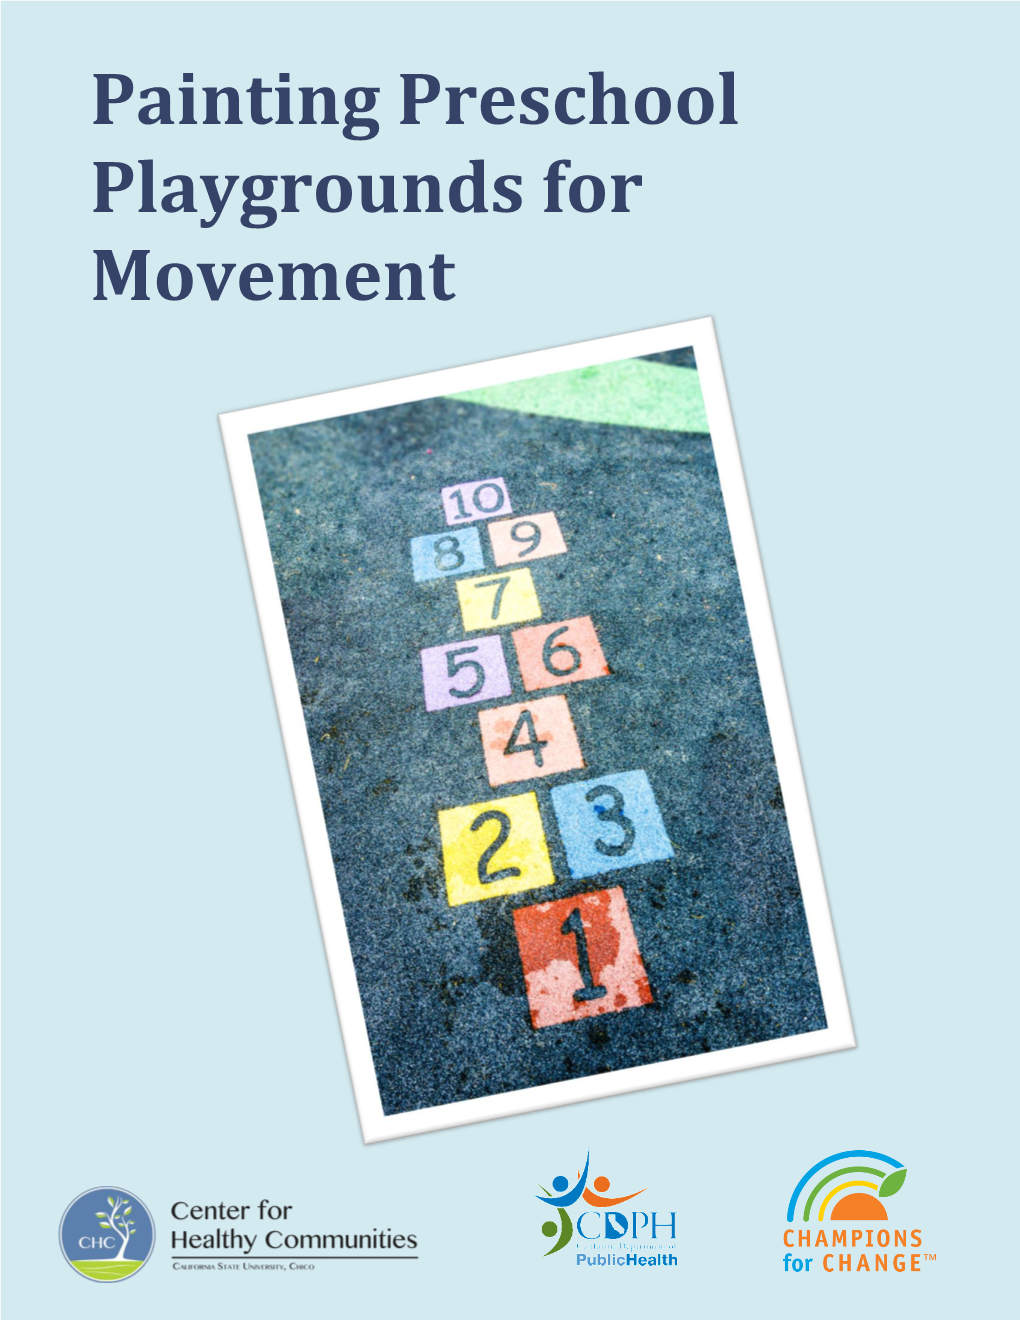 Painting Preschool Playgrounds for Movement